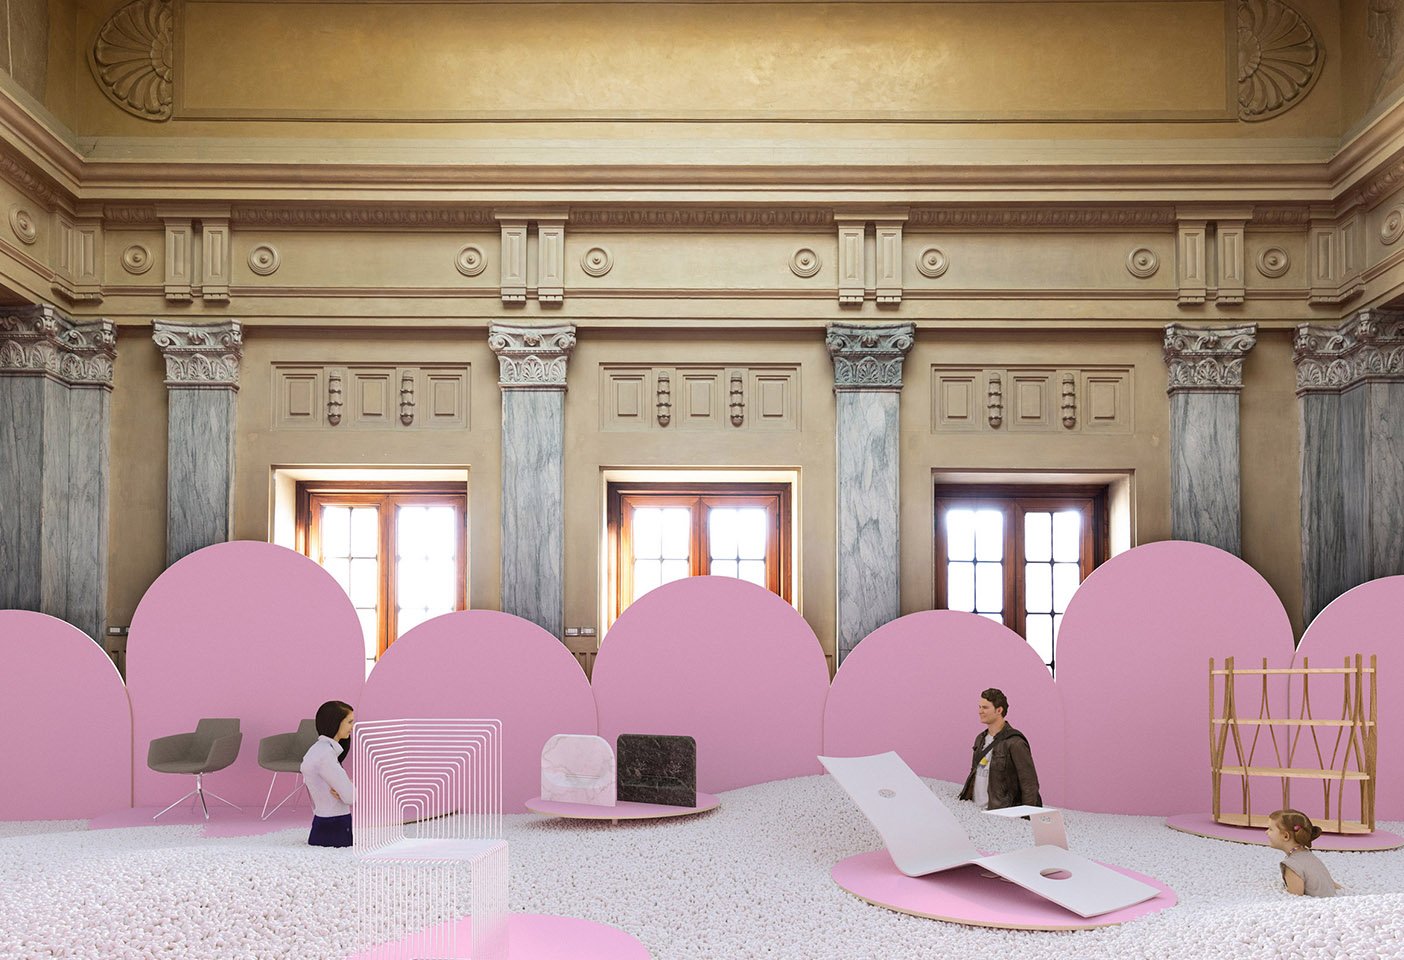 Annually the Milan Furniture Fair features the design world's most fascinating and inspiring installations that open up the city and its historic architecture. Photo c/o Milan Design Week. 